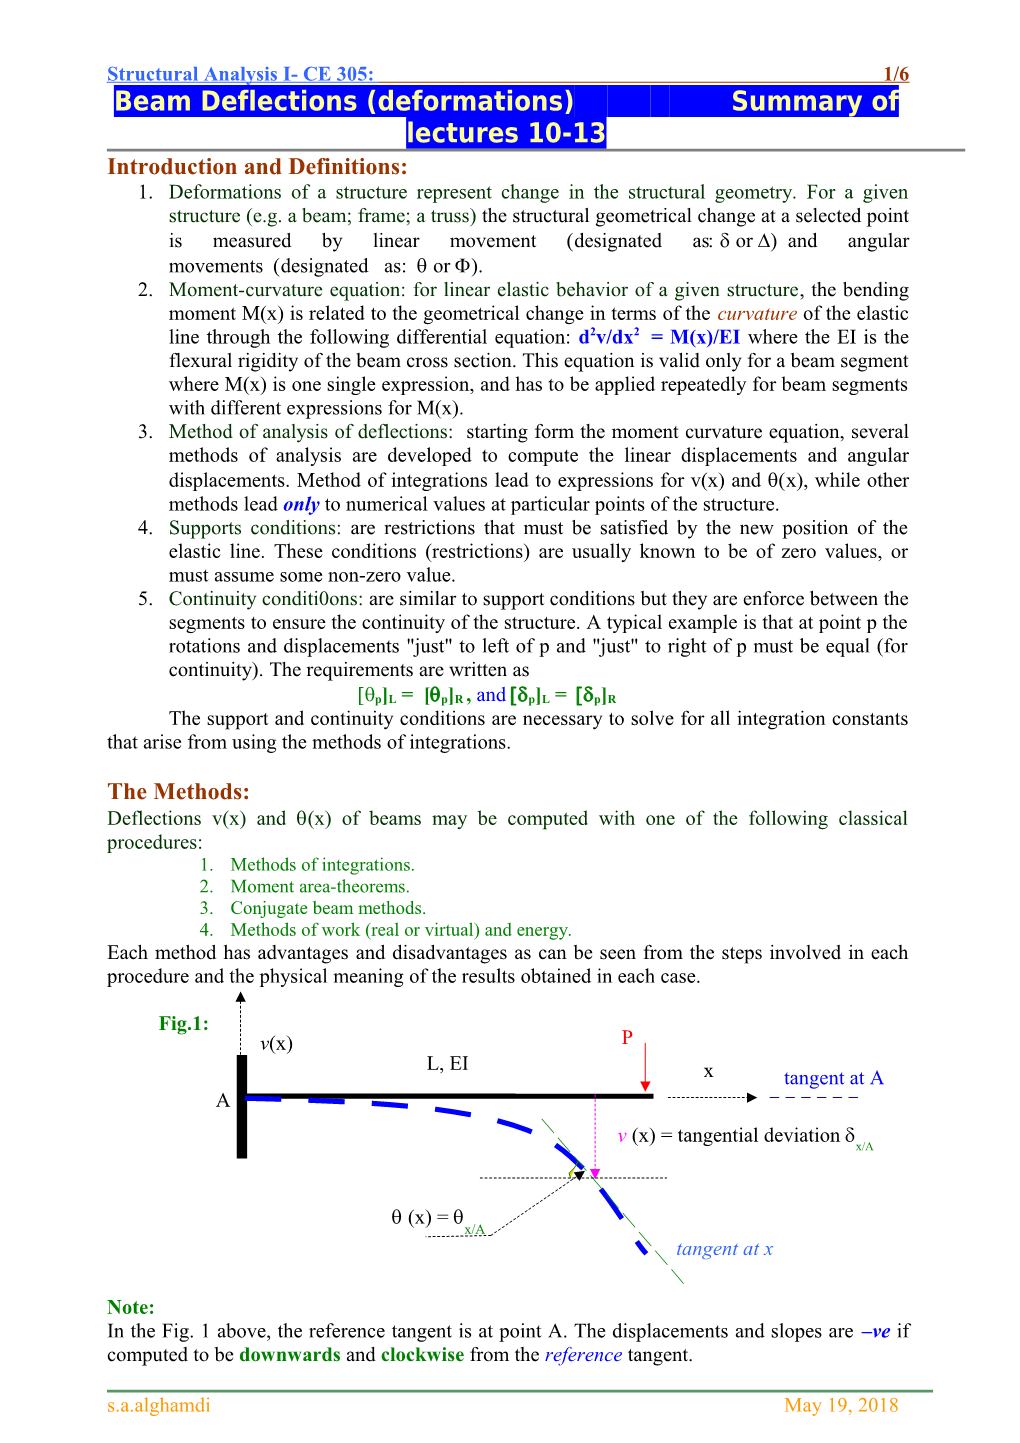 Beam Deflections (Deformations) Summary of Lectures 10-13